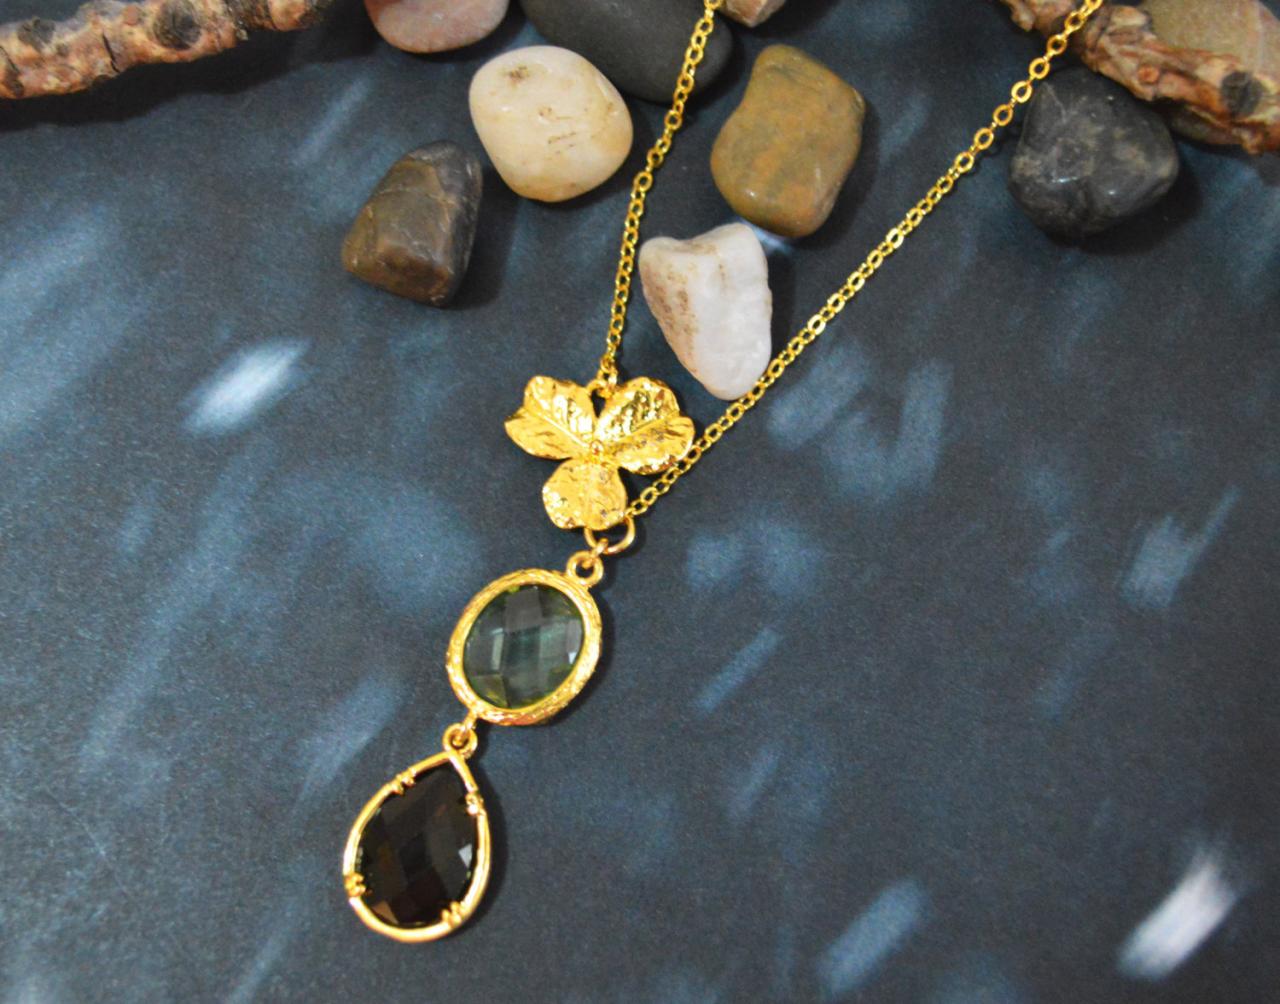 Flower Pendant Necklace, Morion Drop Necklace, Bezel Set Necklace, Gold Plated Necklace/bridesmaid Gifts/everyday Jewelry/